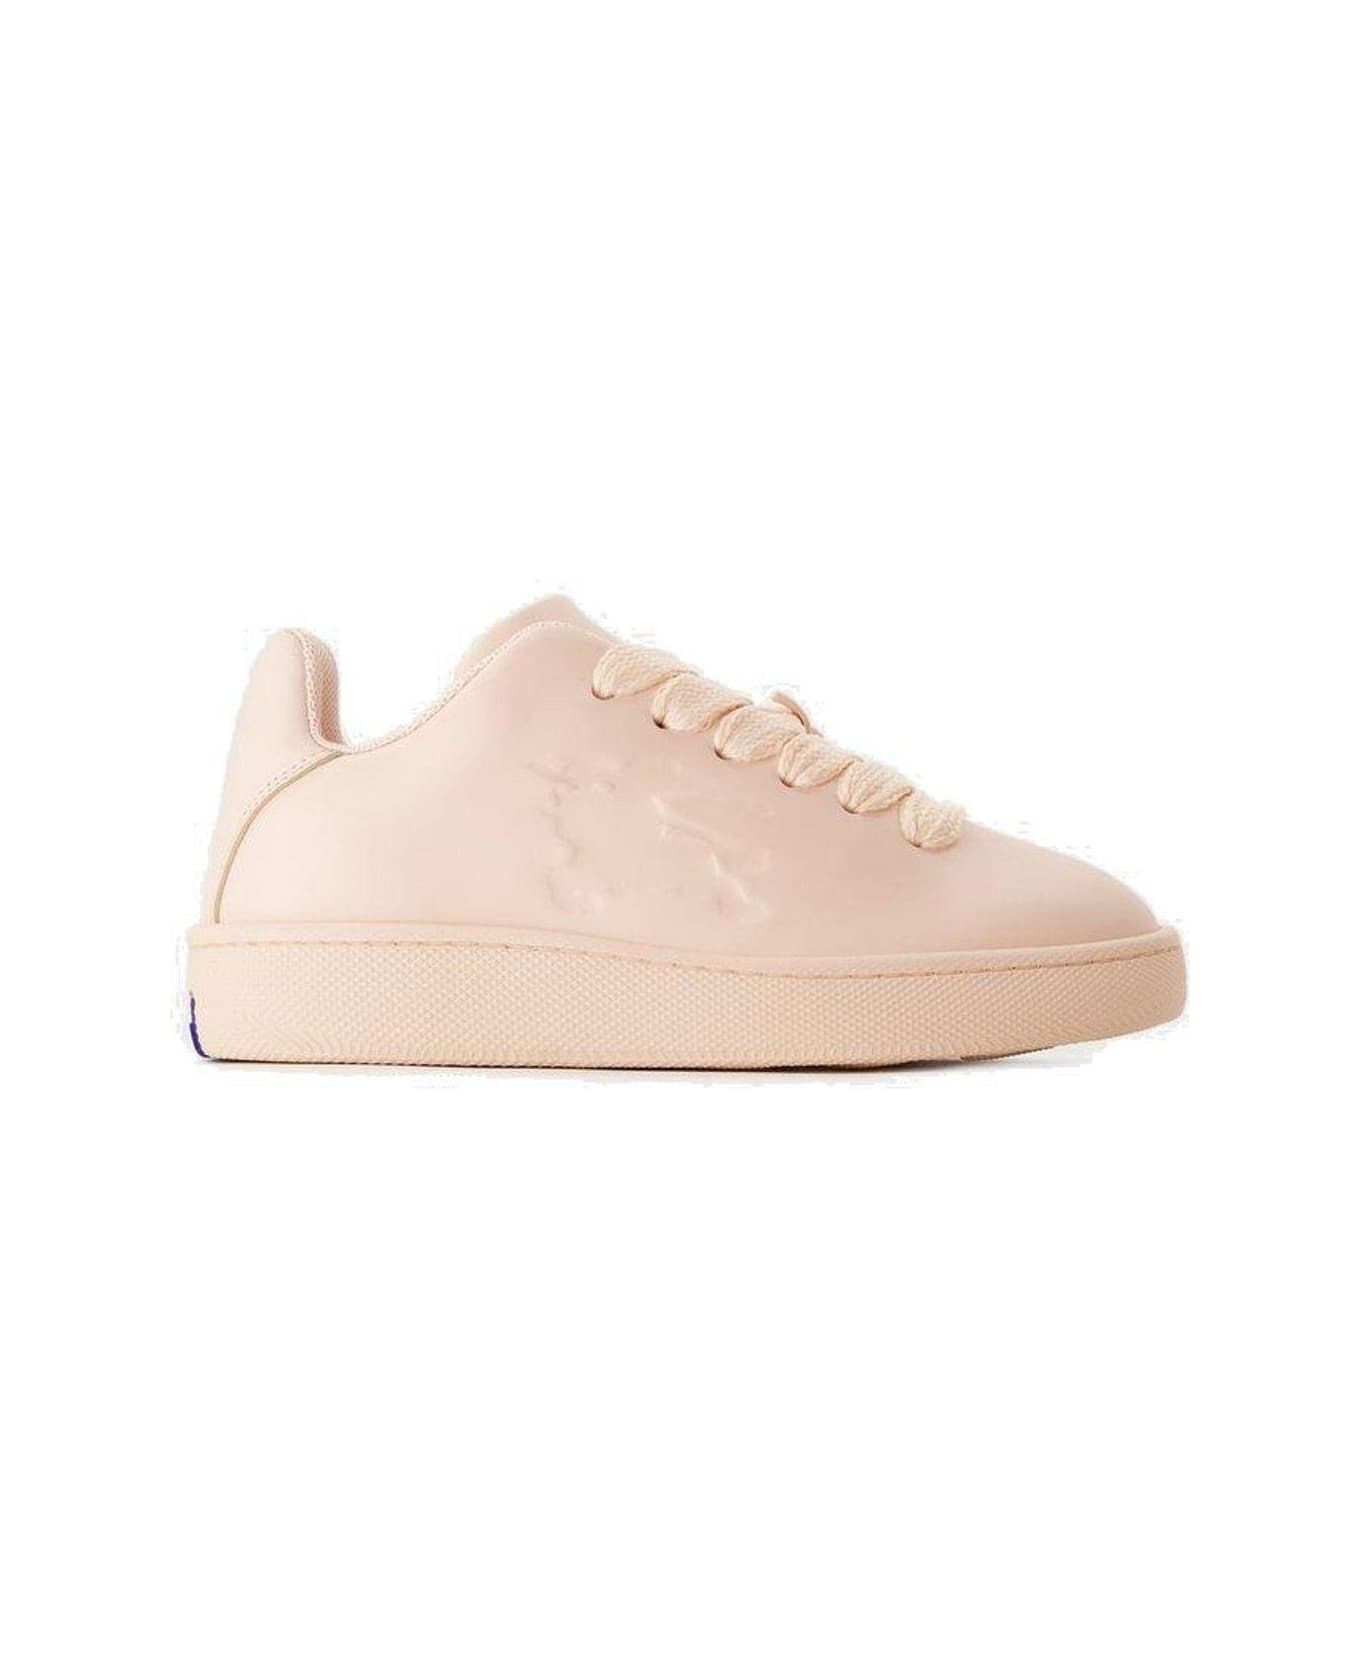 Burberry Box Equestrian Knight Embossed Sneakers - Rosa